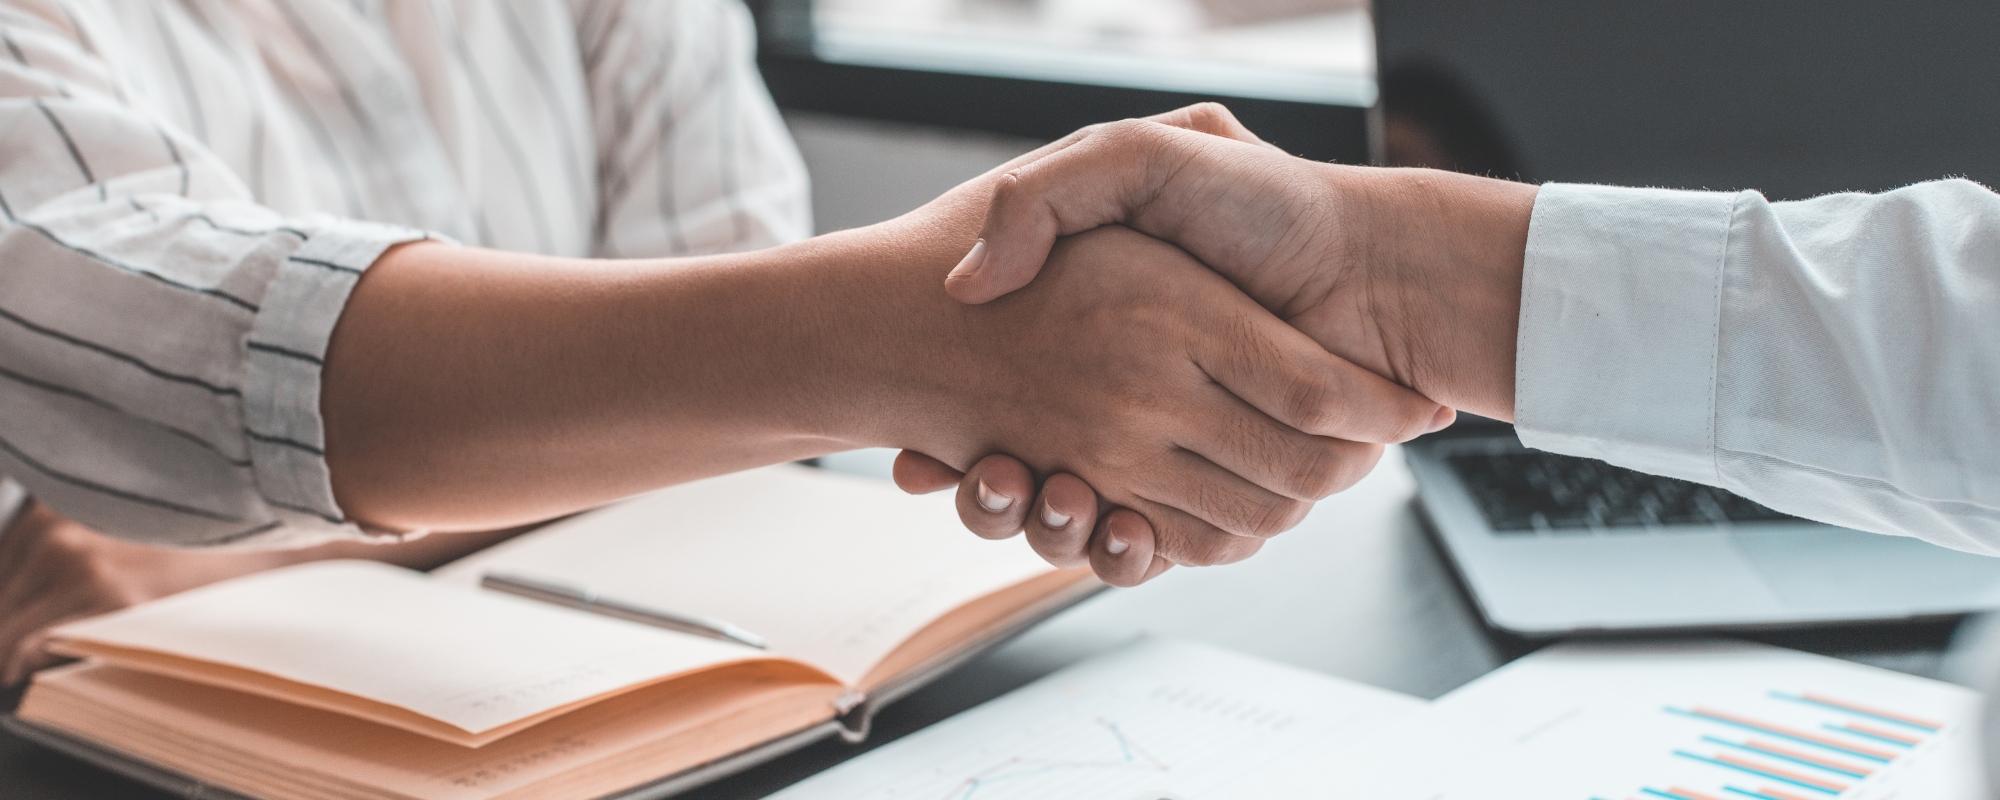 A handshake across a desk - Building Strong Relationships with Authorized Resellers: The Key to MAP Compliance and More